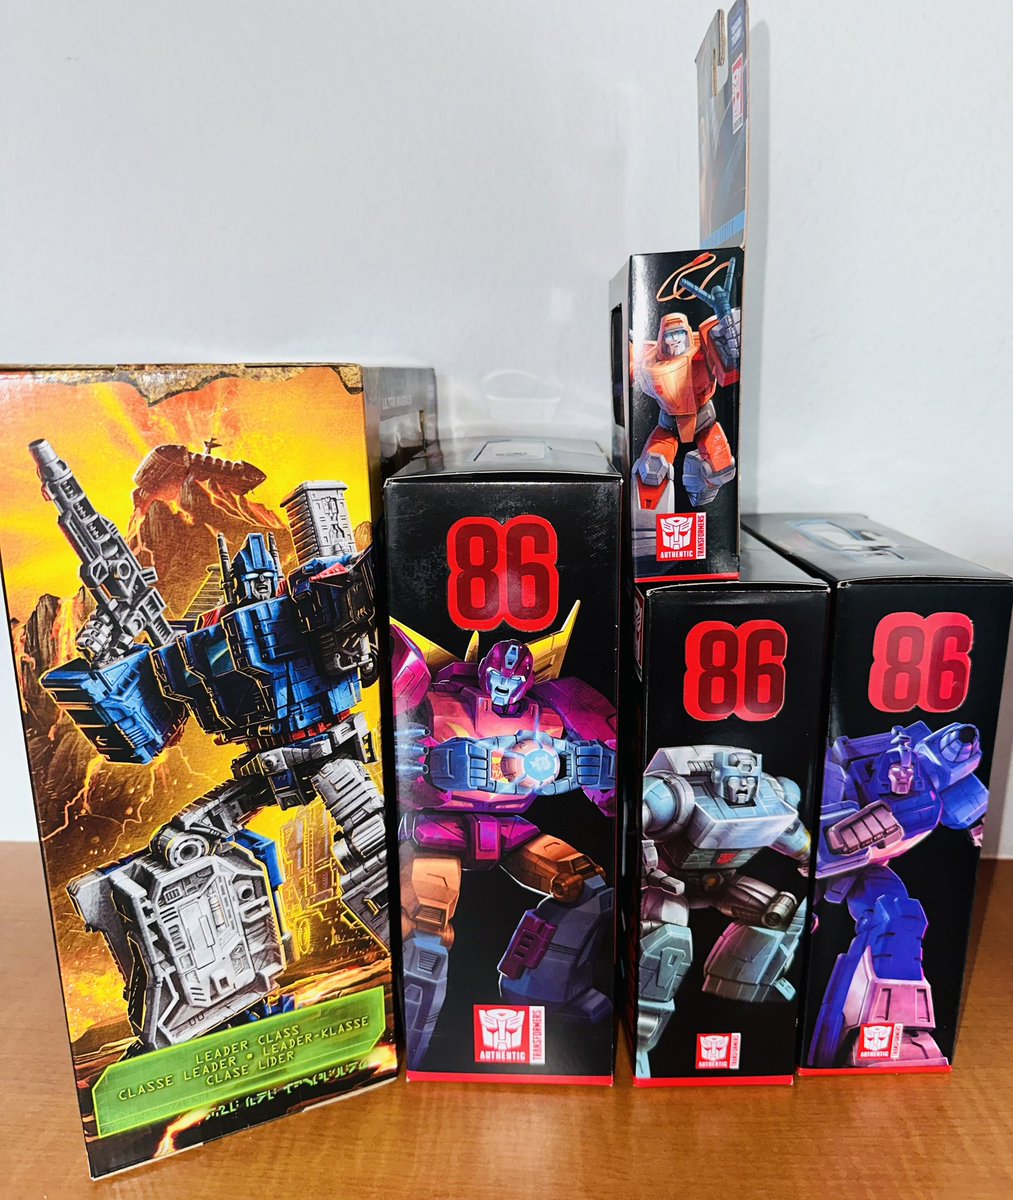 Toys!🙌 Nice pile ‘O loot today from @BigBadToyStore. New MOTU Origins Snake Men wave. New GI Joe Classified Sgt Slaughter. (With epic box art by @AdamRichesArt!) Then catching up on collecting Transformers ‘86 movie releases in box.